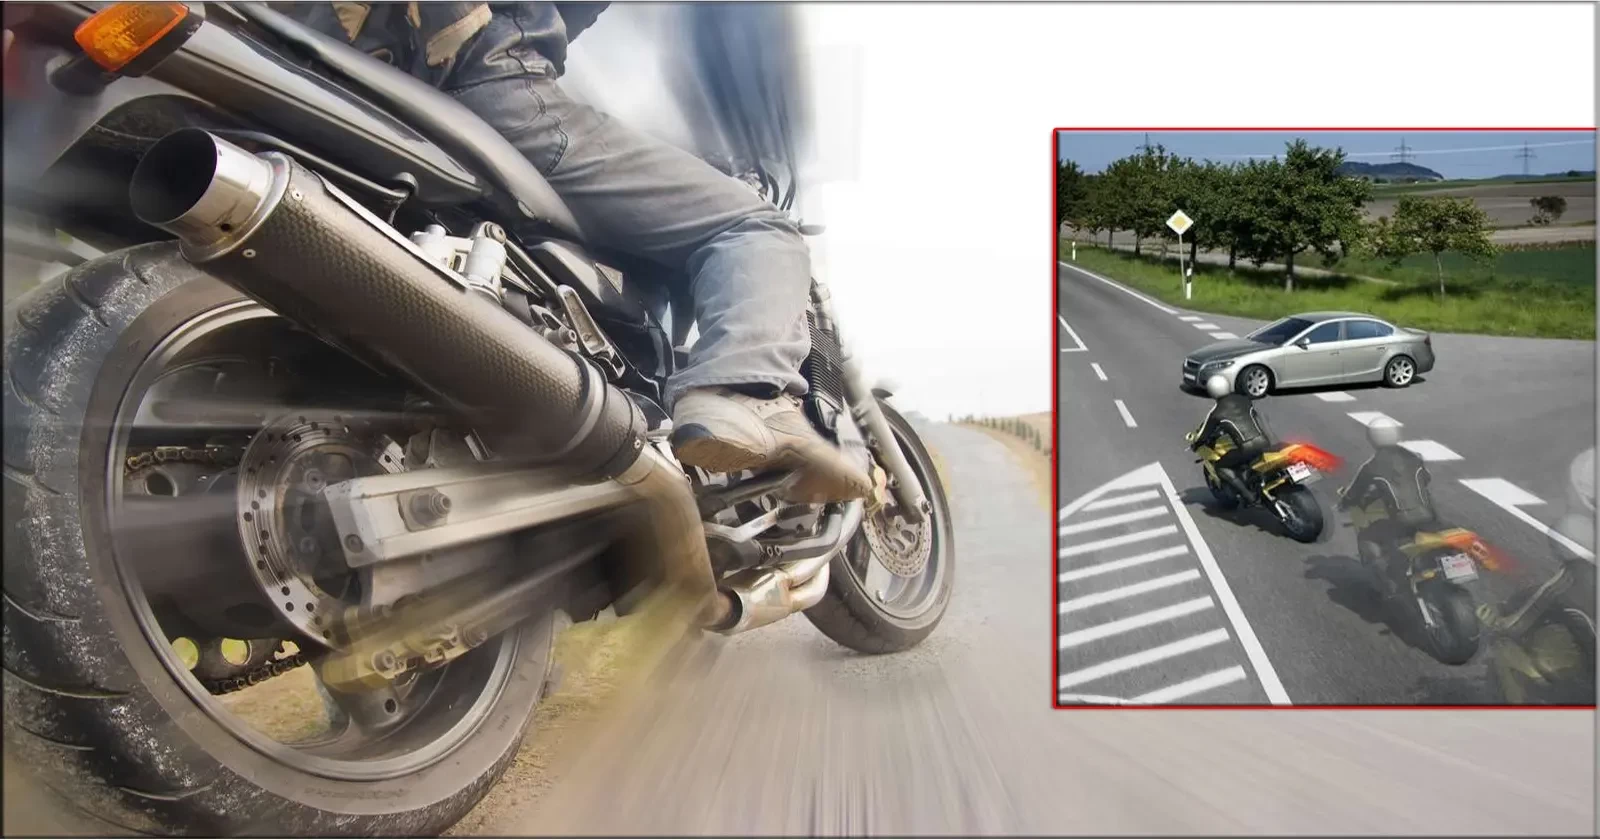 How To Do Safe Braking While Riding A Motorcycle